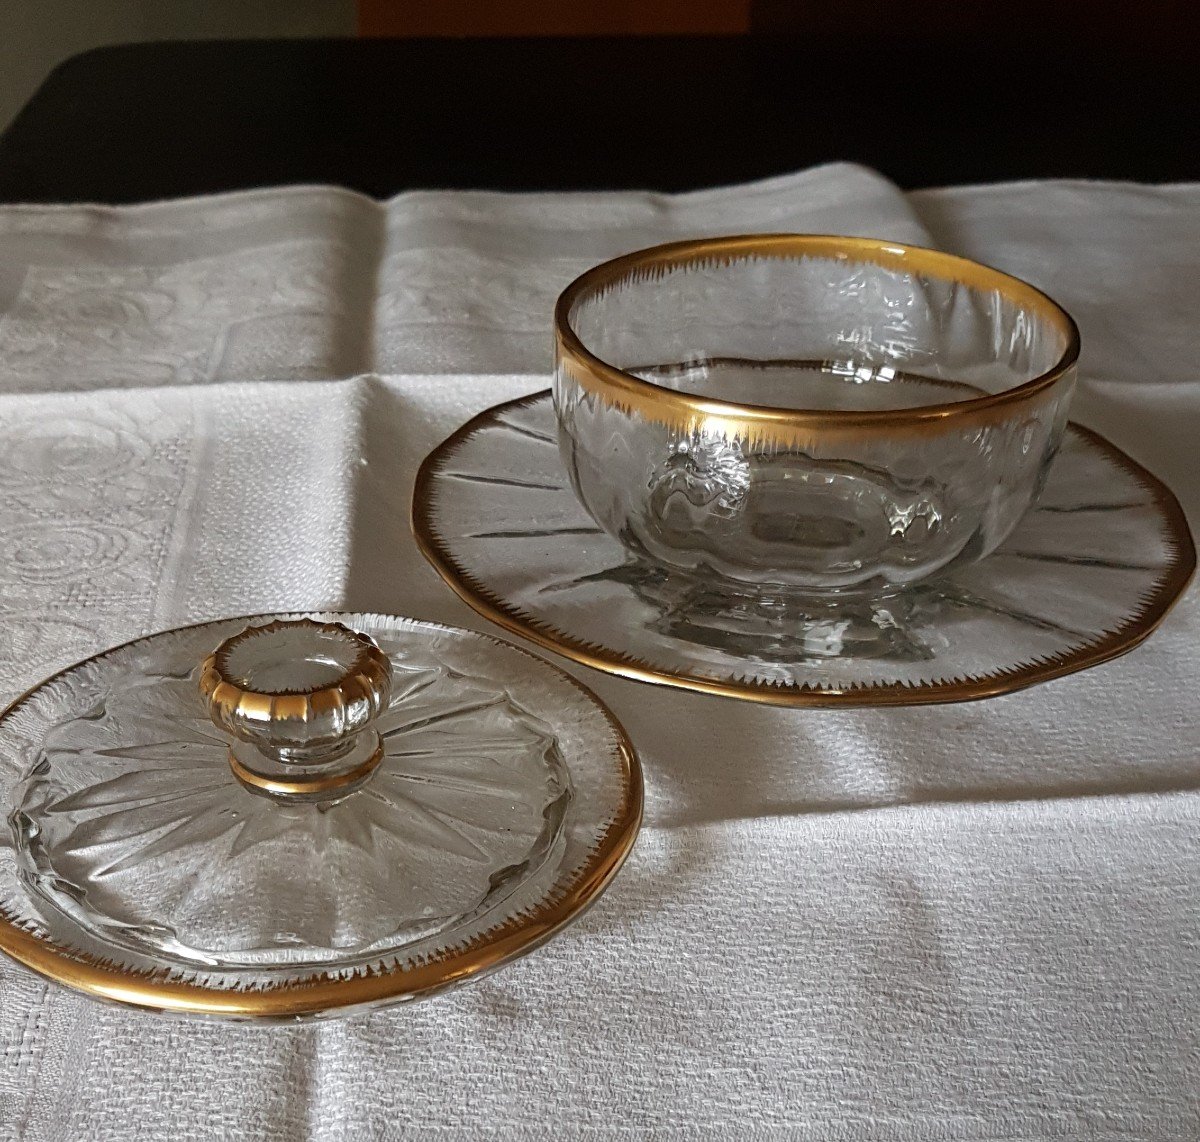 Covered Jampot And Its Daum Crystal Saucer - 19th Time-photo-4